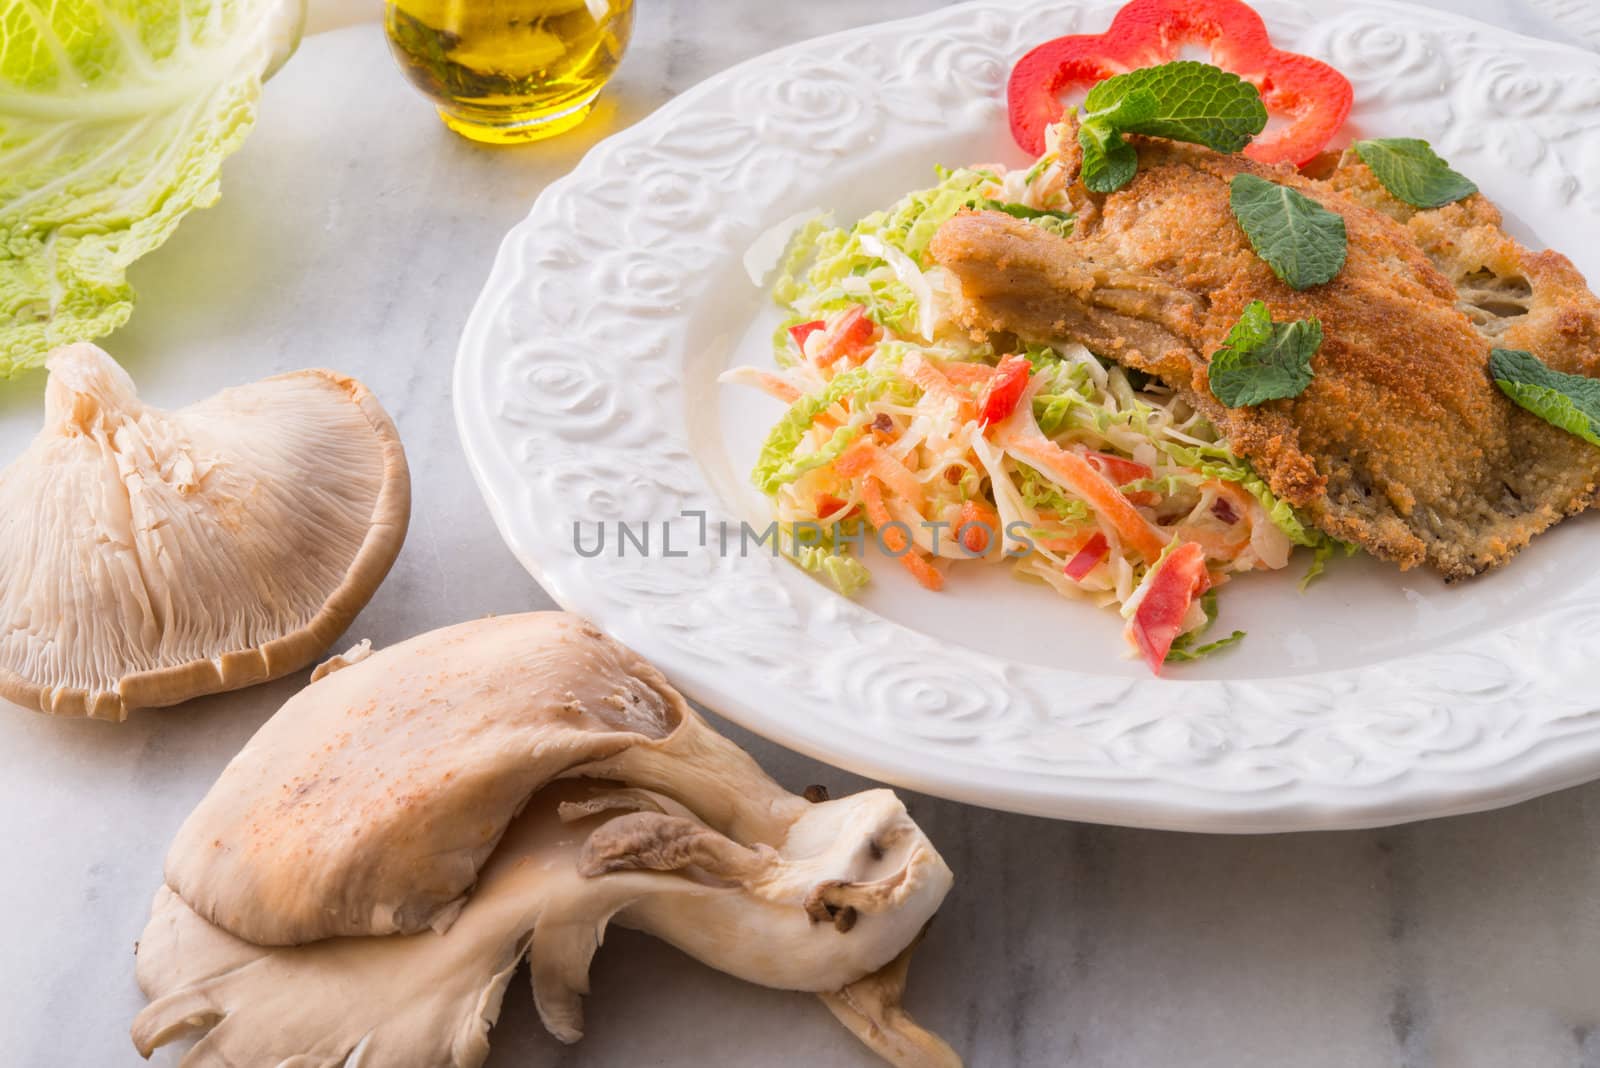 baked oyster mushrooms with fresh savoy cabbage salad